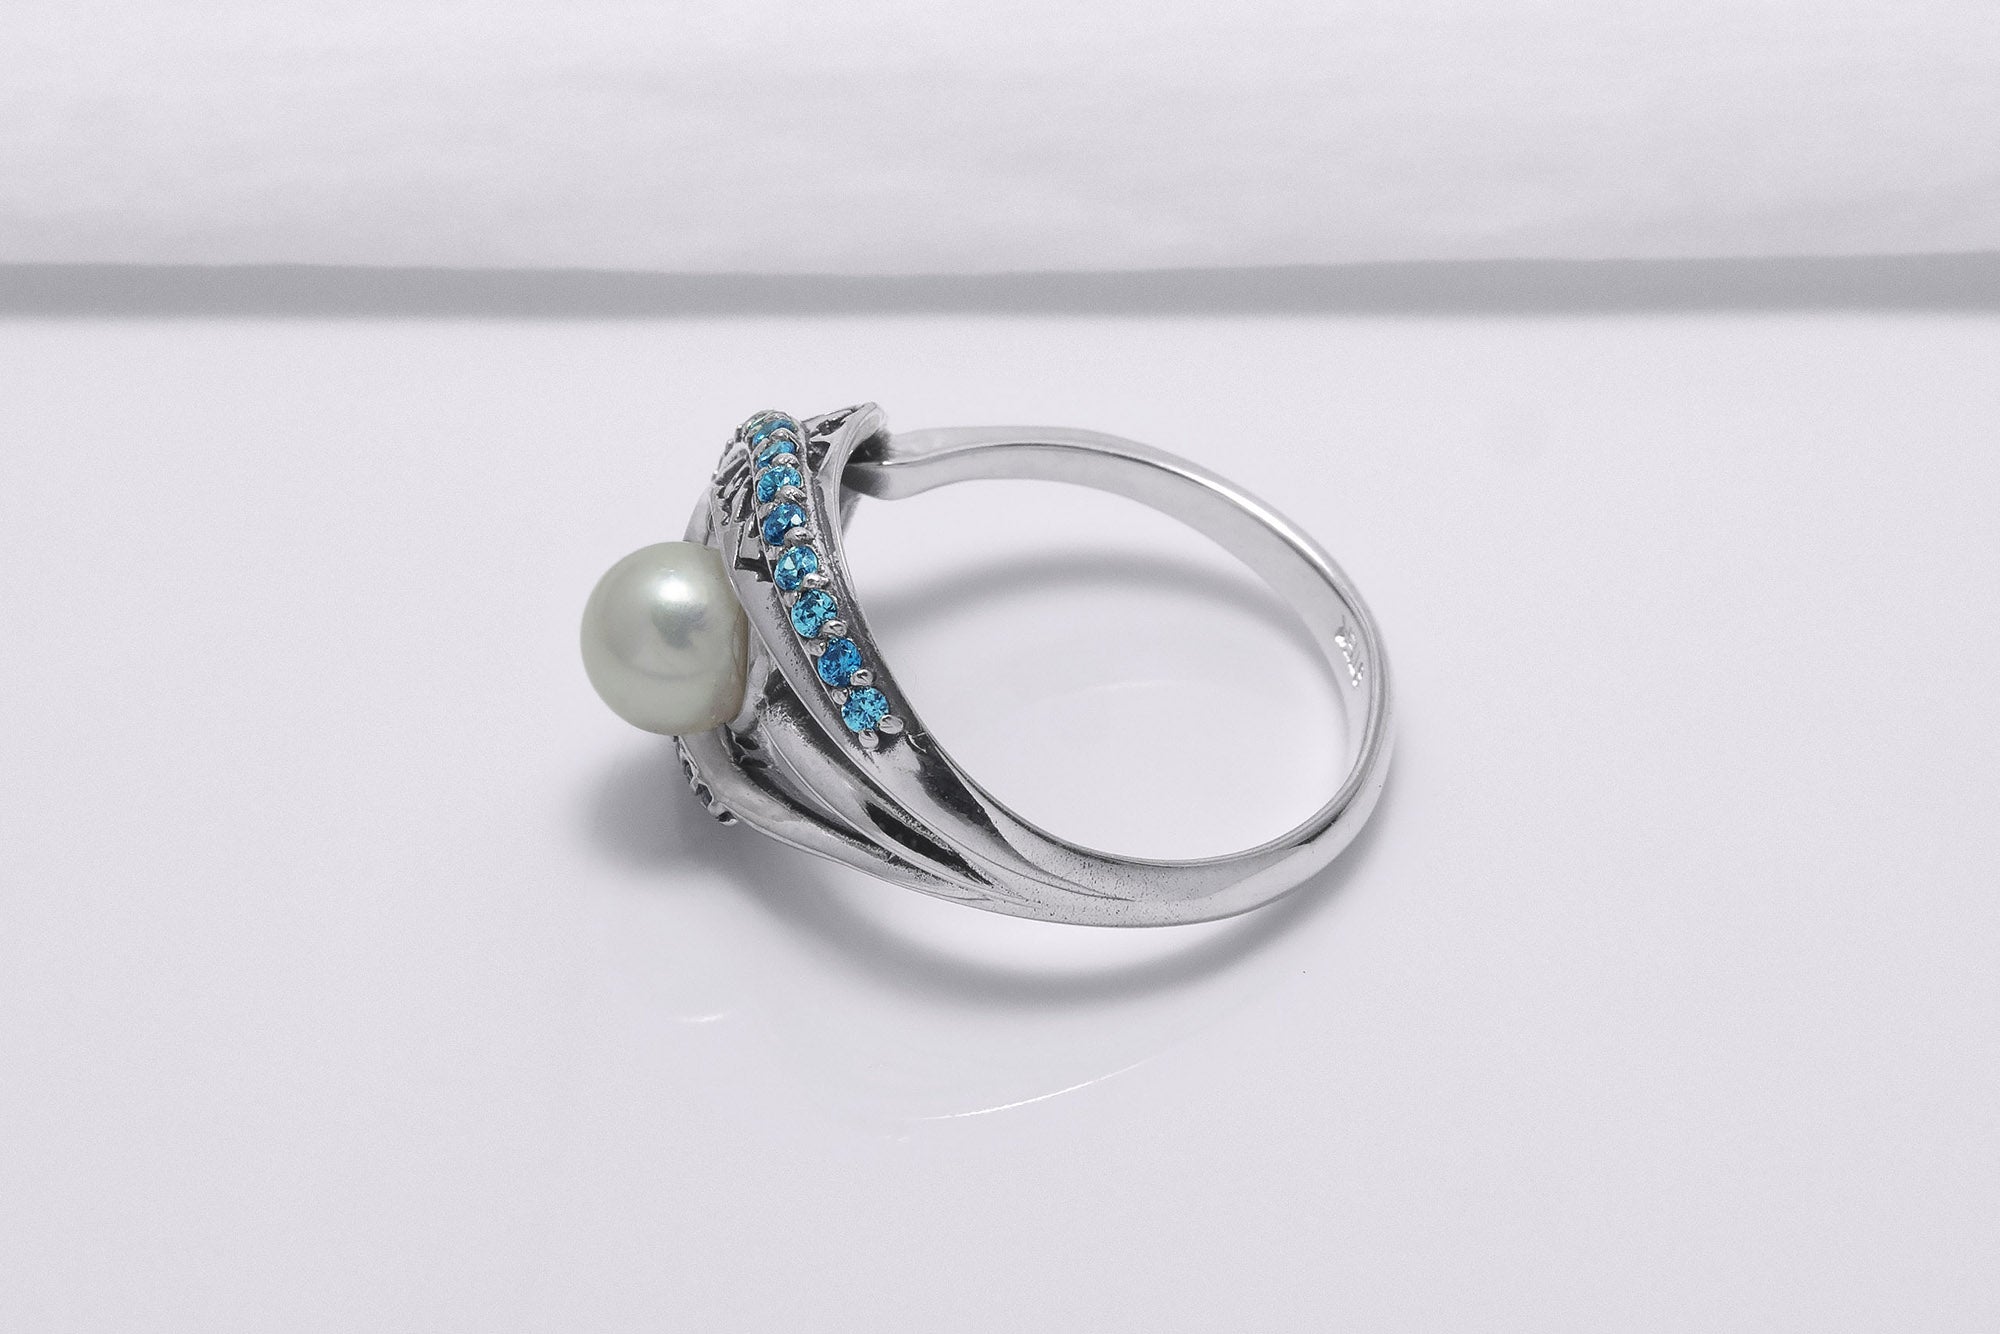 Sterling Silver Open Oval Ring with Ornament and Blue Gems, Handcrafted Fashion Jewelry - vikingworkshop